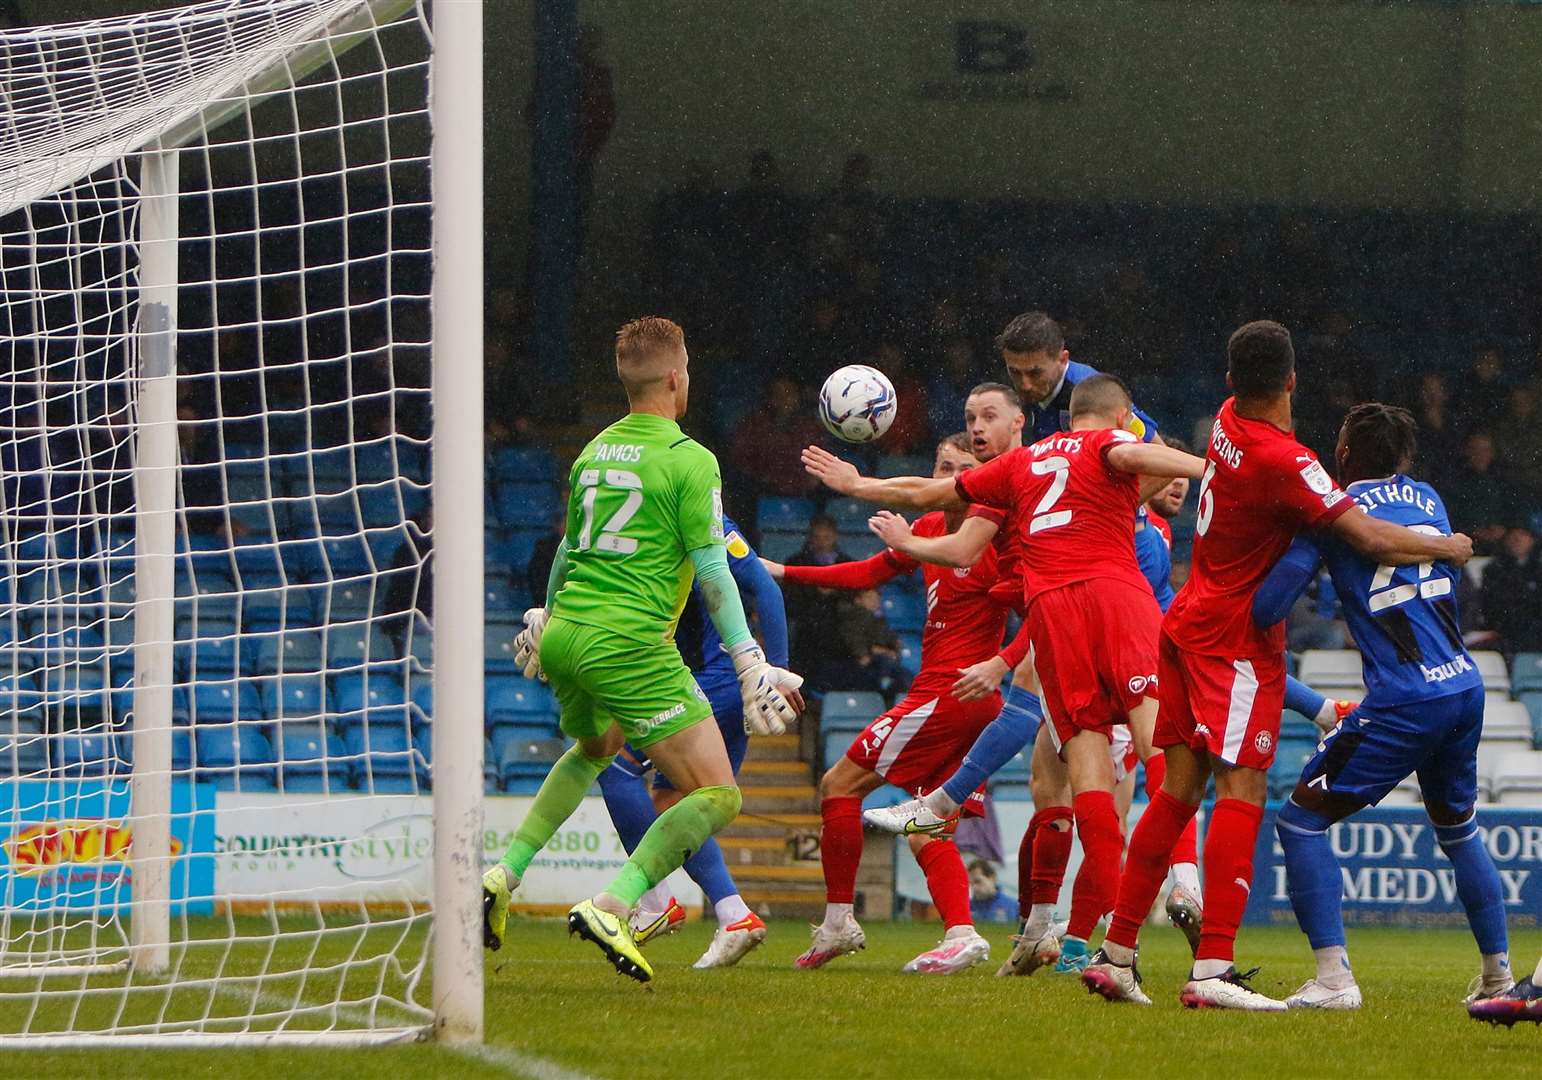 Gillingham pile on the pressure against Wigan on Saturday. Picture: Andy Jones (51835490)